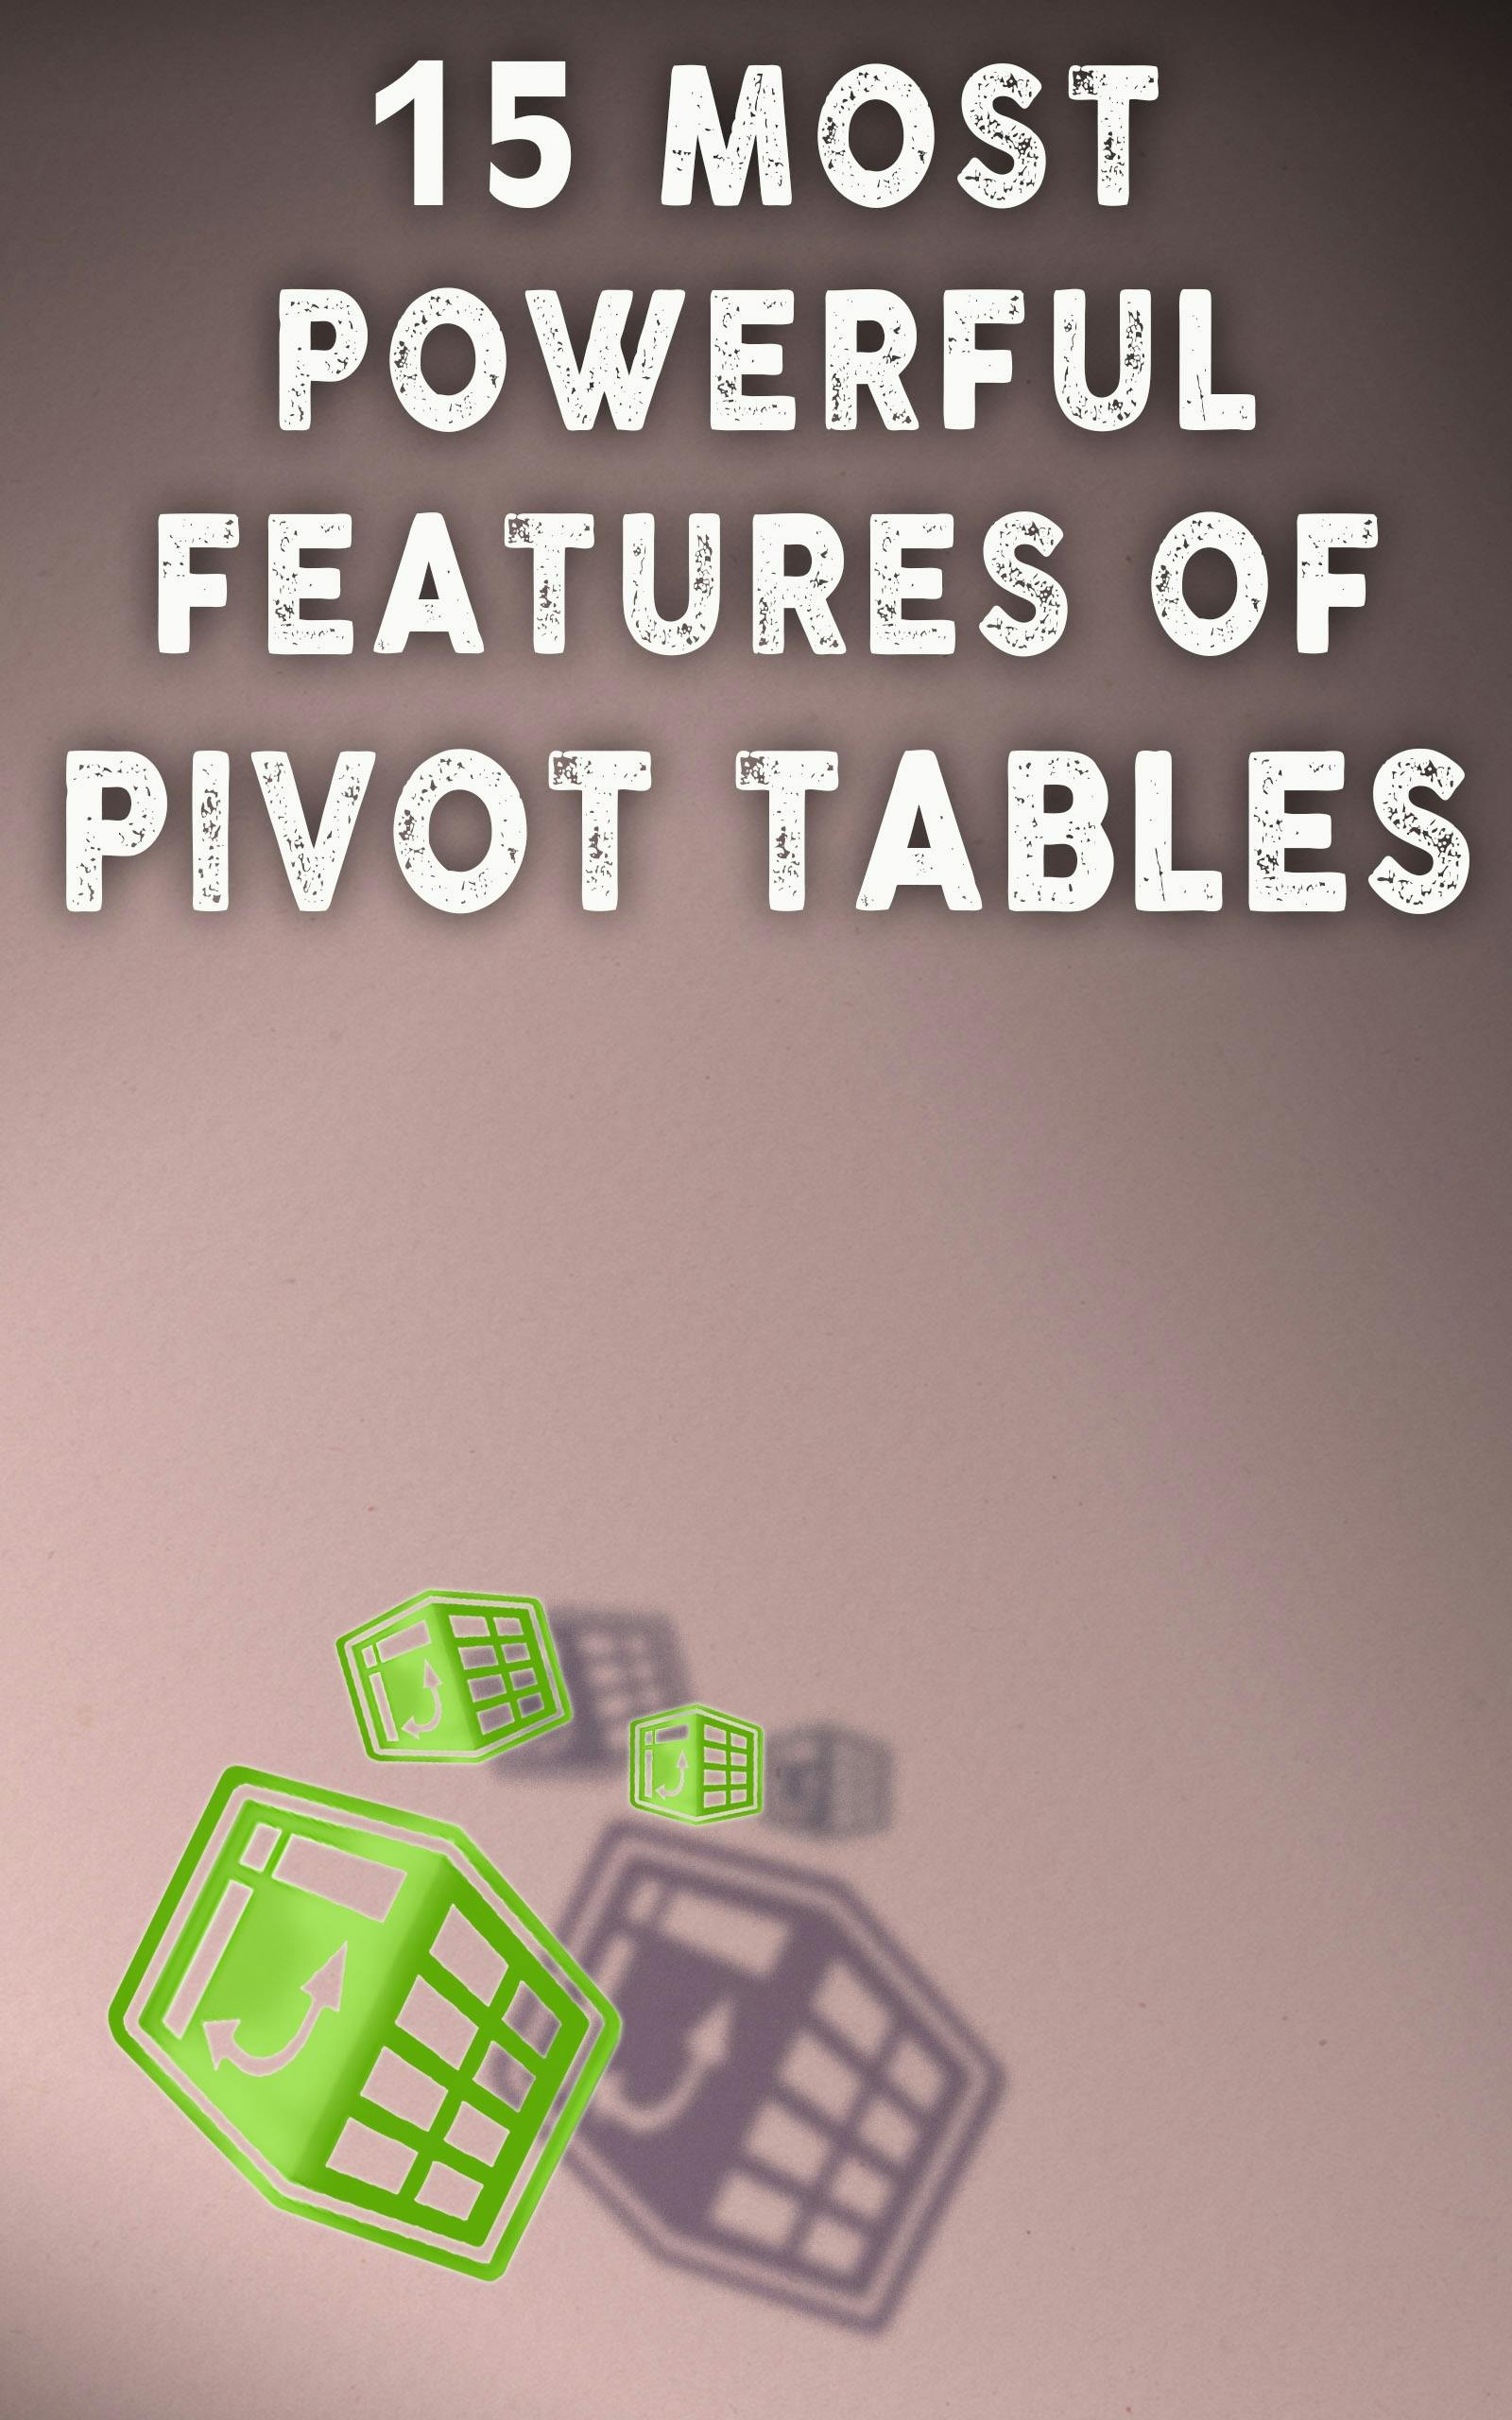 15 Most Powerful Features Of Pivot Tables - Andrei Besedin